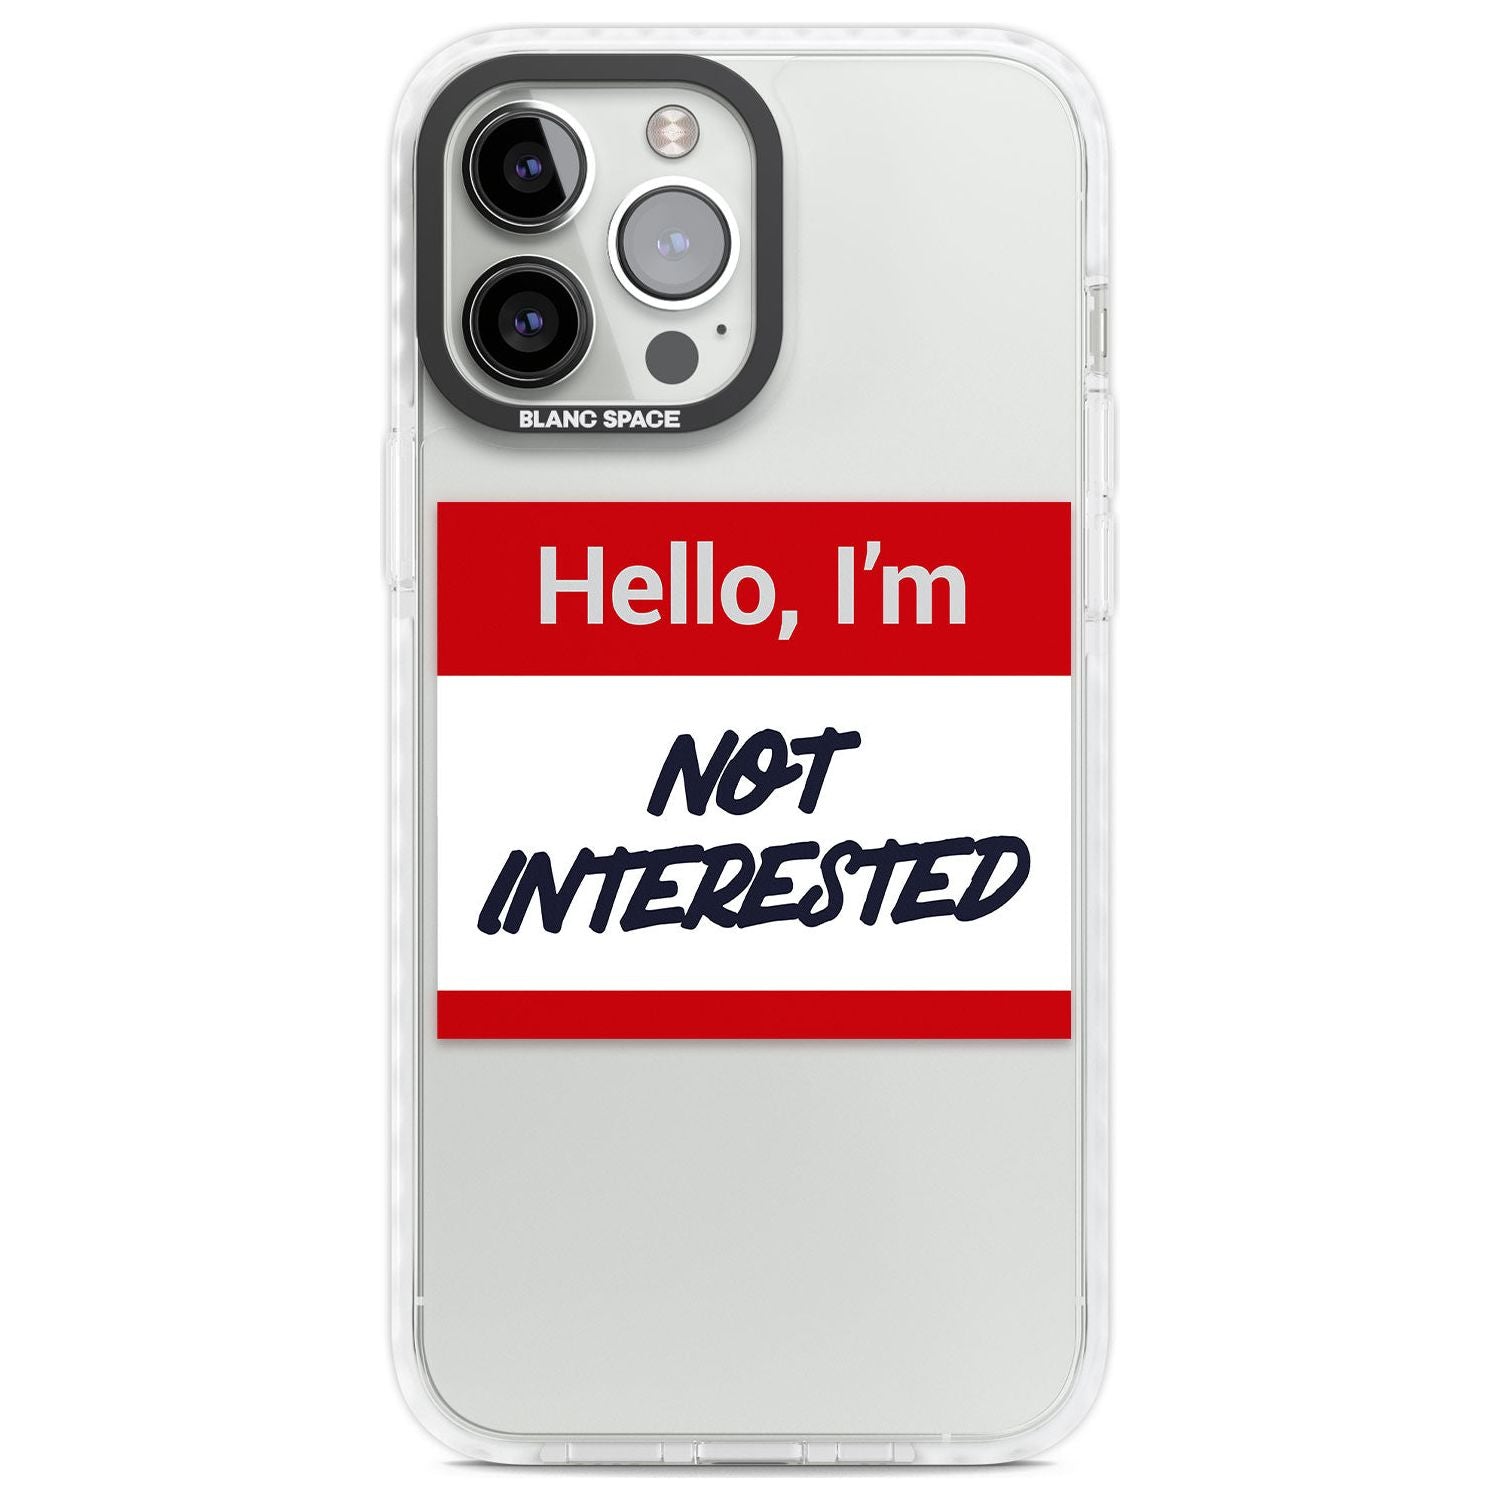 Funny Hello Name Tag Not Interested Phone Case iPhone 13 Pro Max / Impact Case,iPhone 14 Pro Max / Impact Case Blanc Space